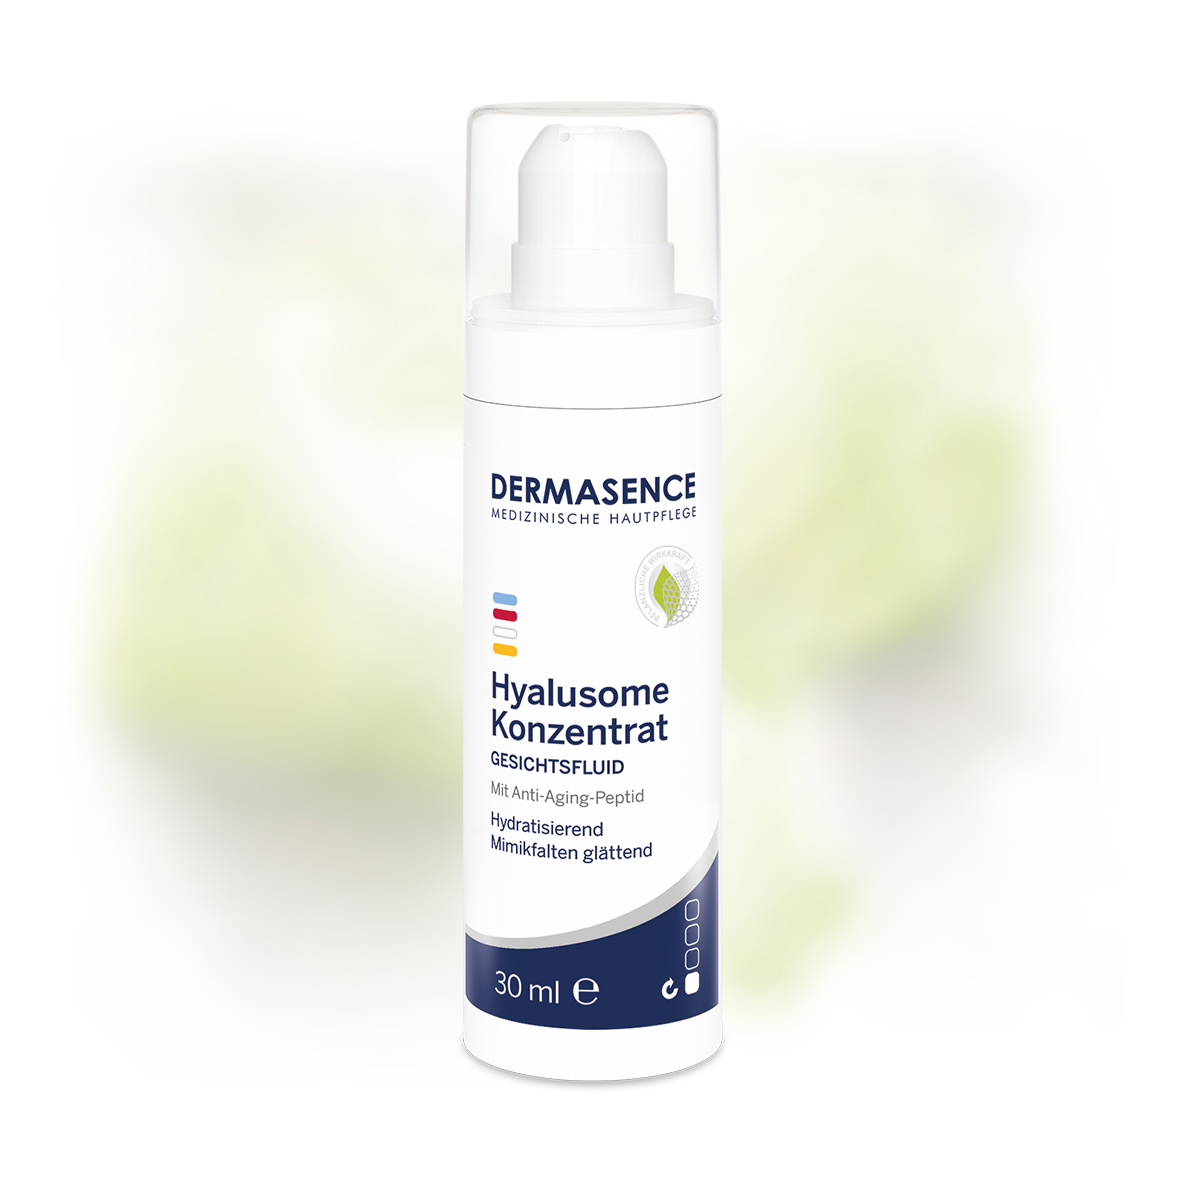 DERMASENCE Hyalusome Concentrate, 30 ml